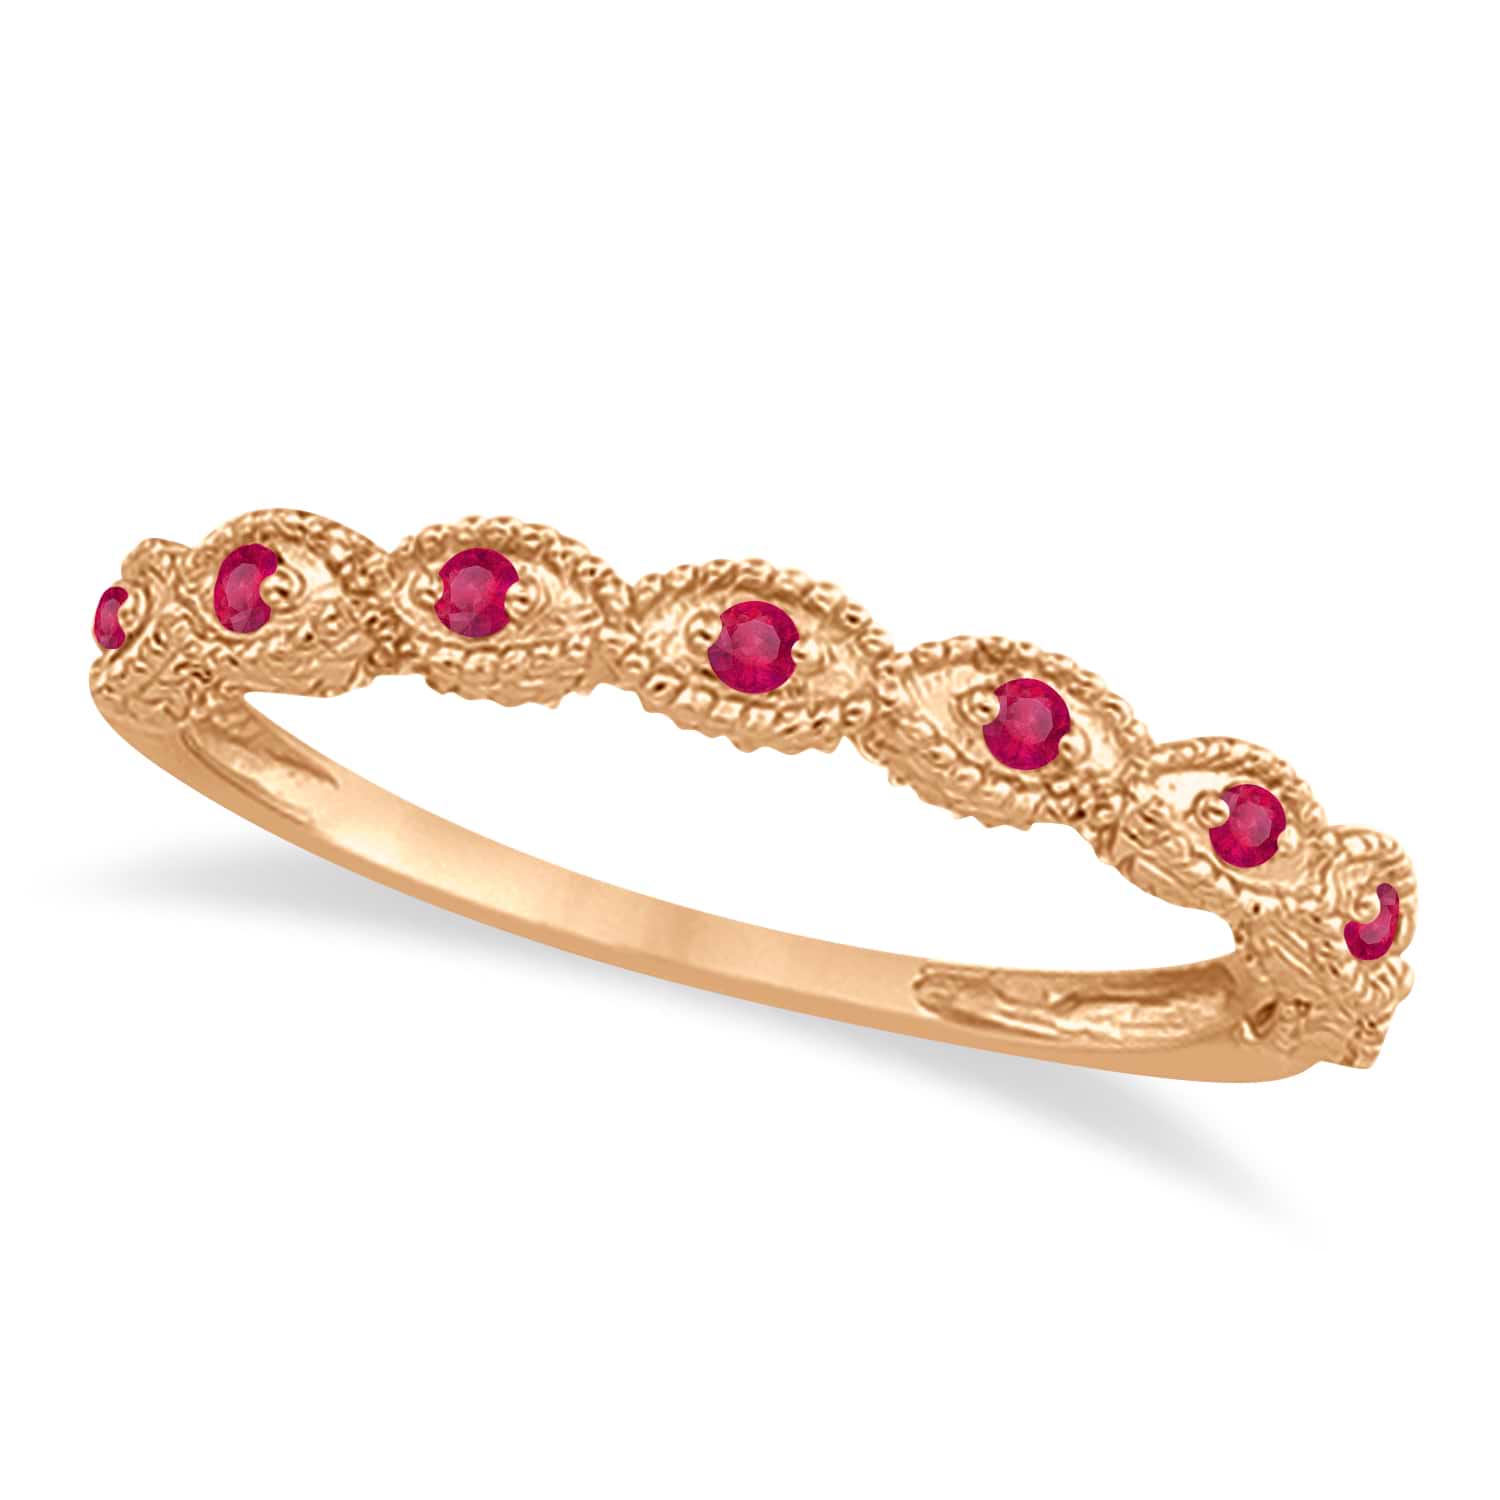 Antique Marquise Shape Ruby Wedding Ring 14k Rose Gold (0.18ct)